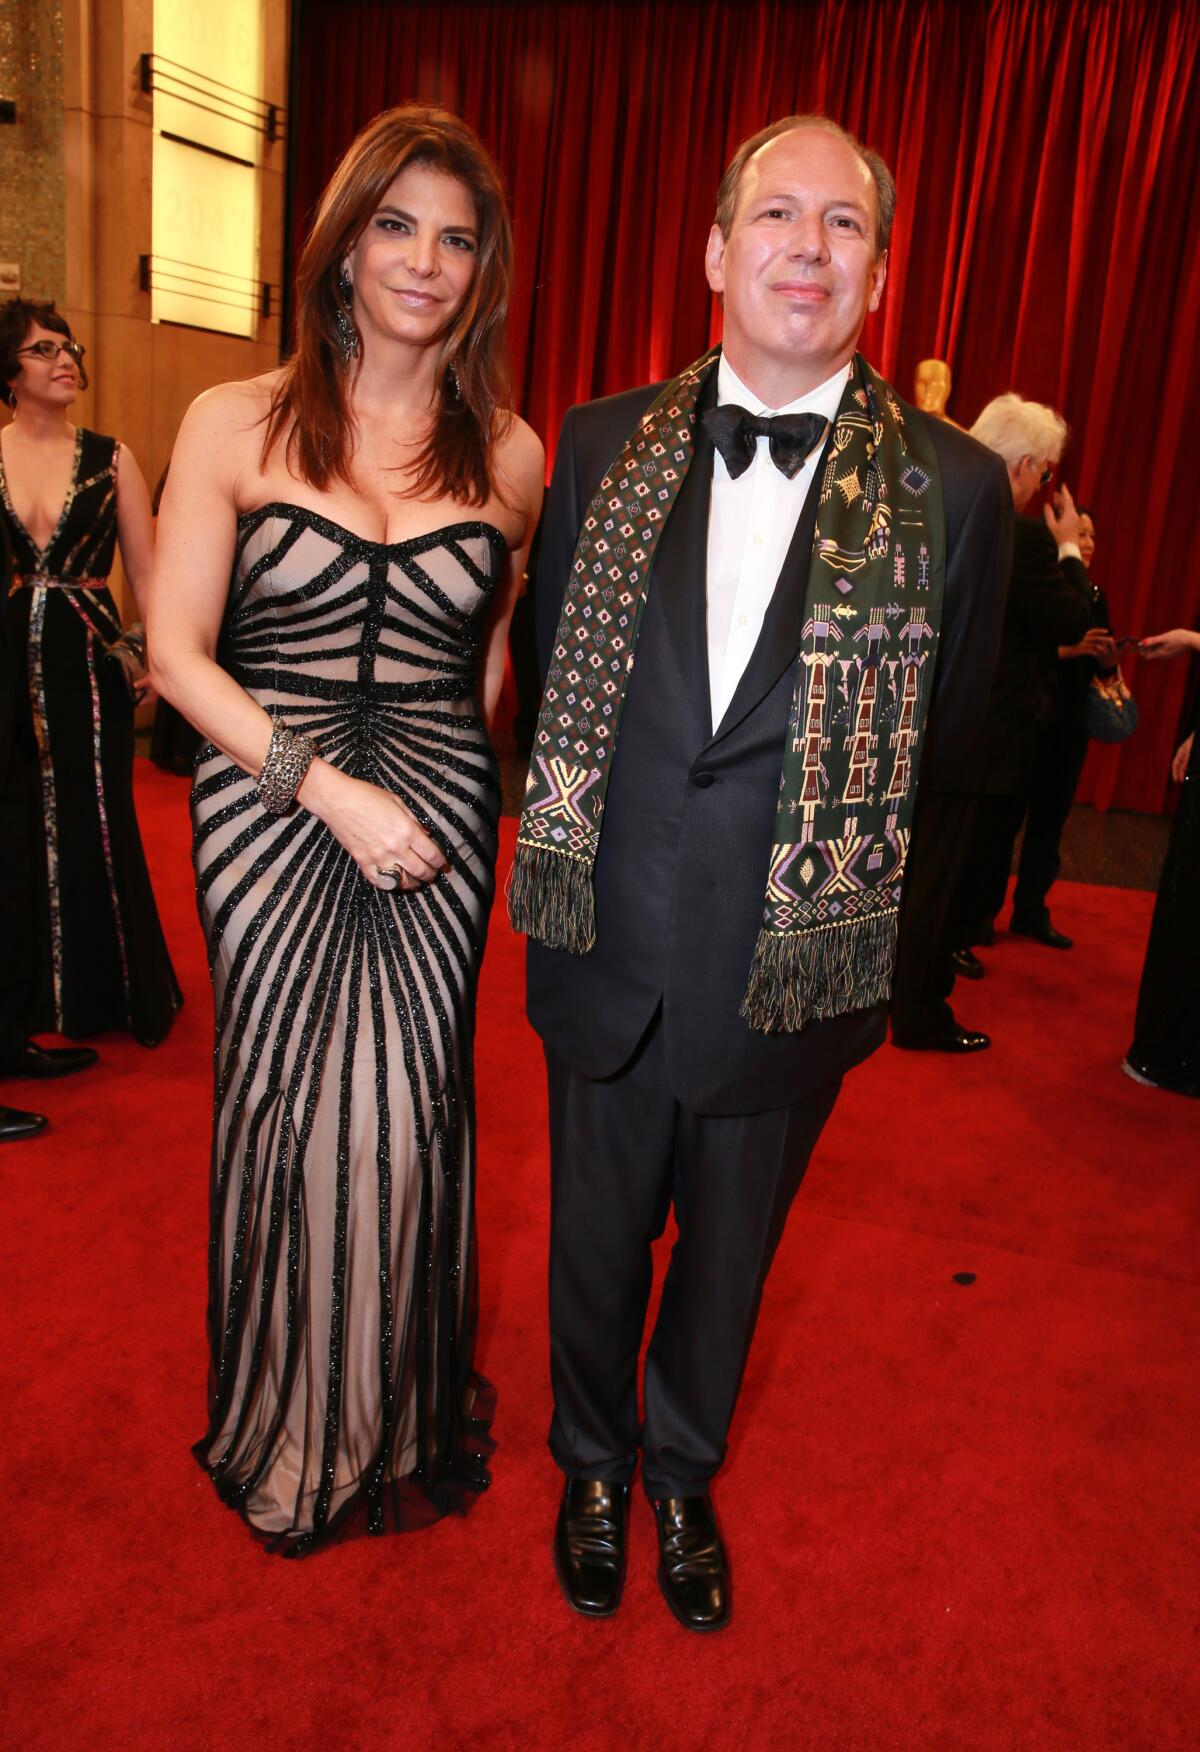 Dina De Luca Chartouni, in a black strapless dress, walks the red carpet with Hans Zimmer, in a black tuxedo and scarf.